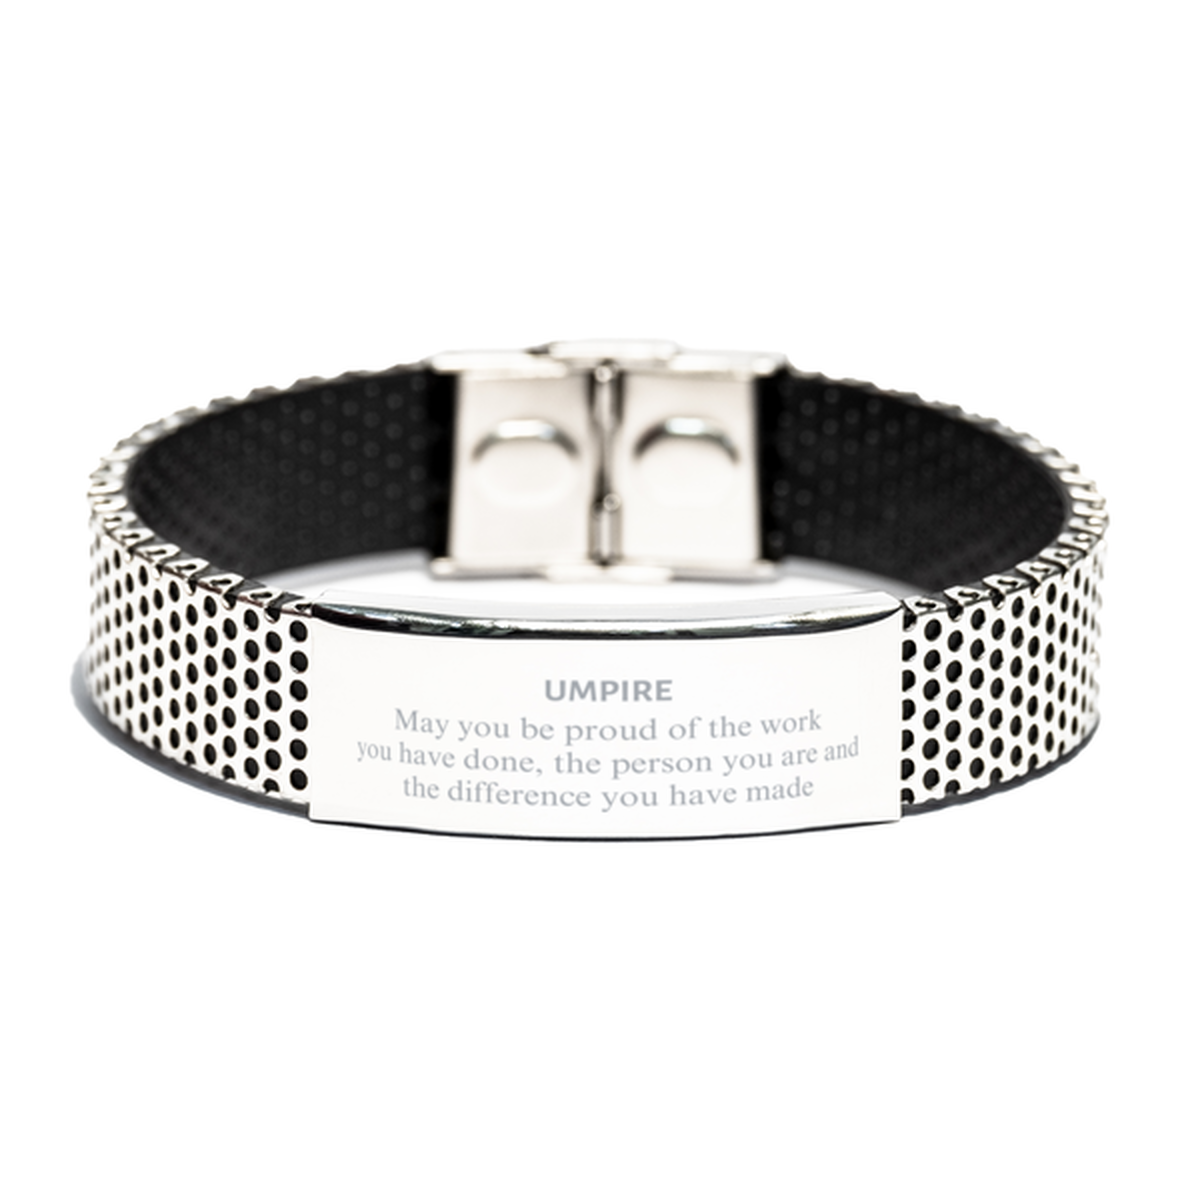 Umpire May you be proud of the work you have done, Retirement Umpire Stainless Steel Bracelet for Colleague Appreciation Gifts Amazing for Umpire